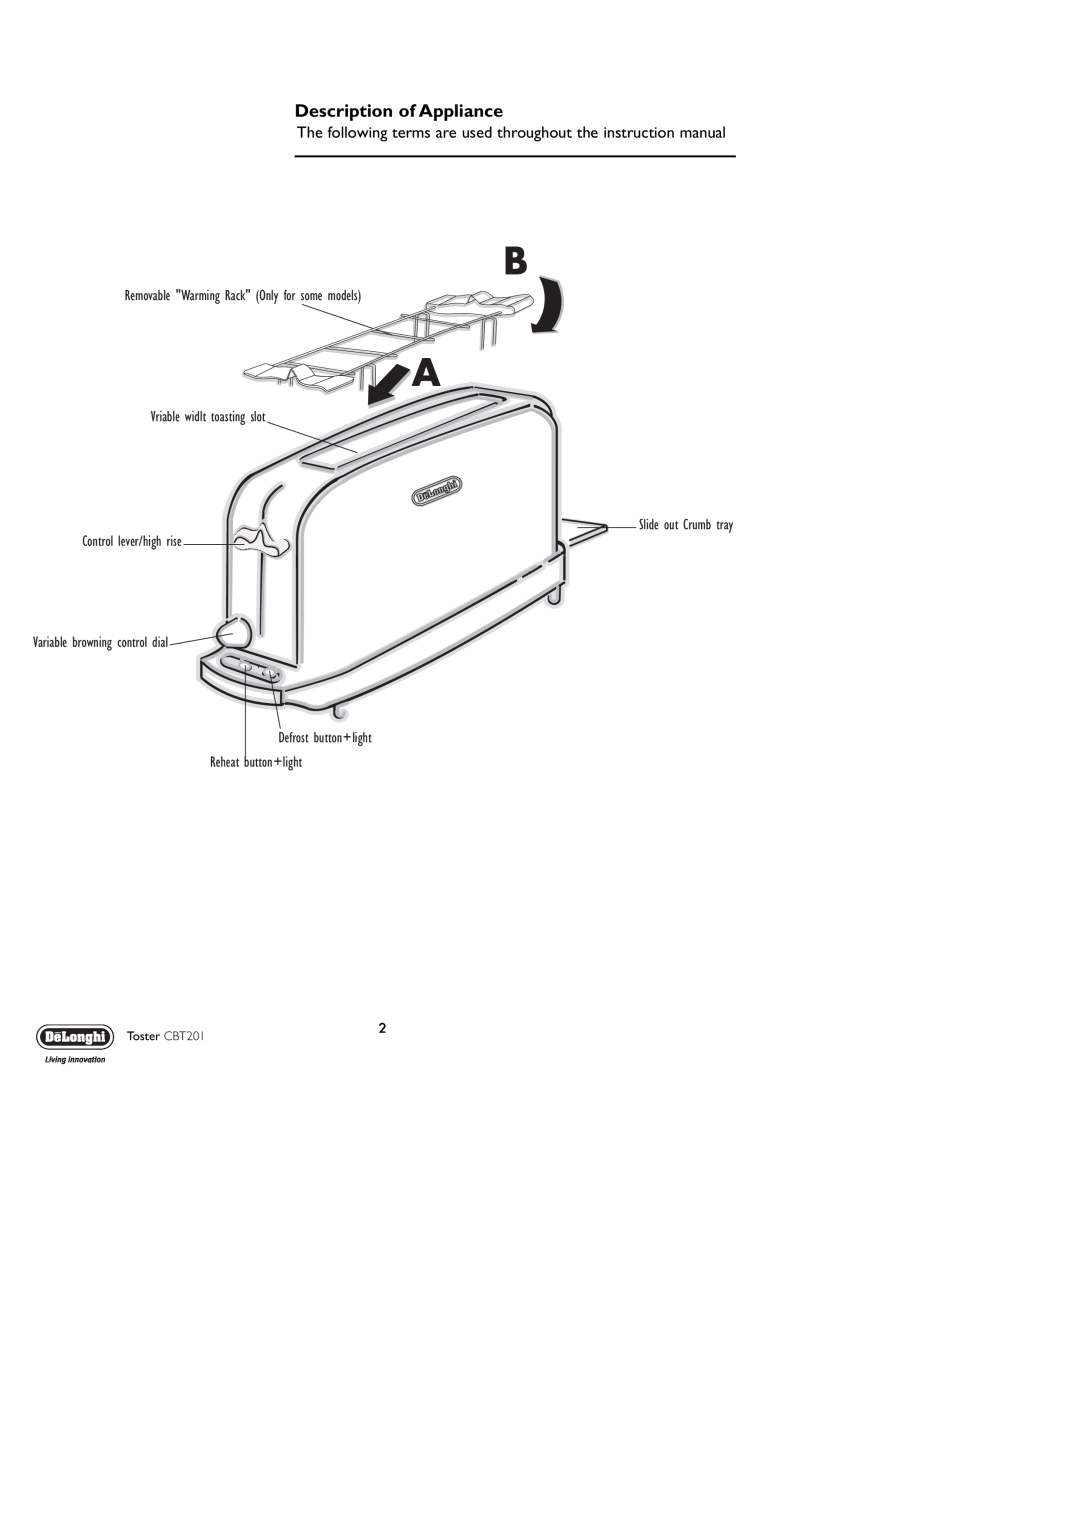 DeLonghi CBT201 manual Description of Appliance, Removable Warming Rack Only for some models, Control lever/high rise 